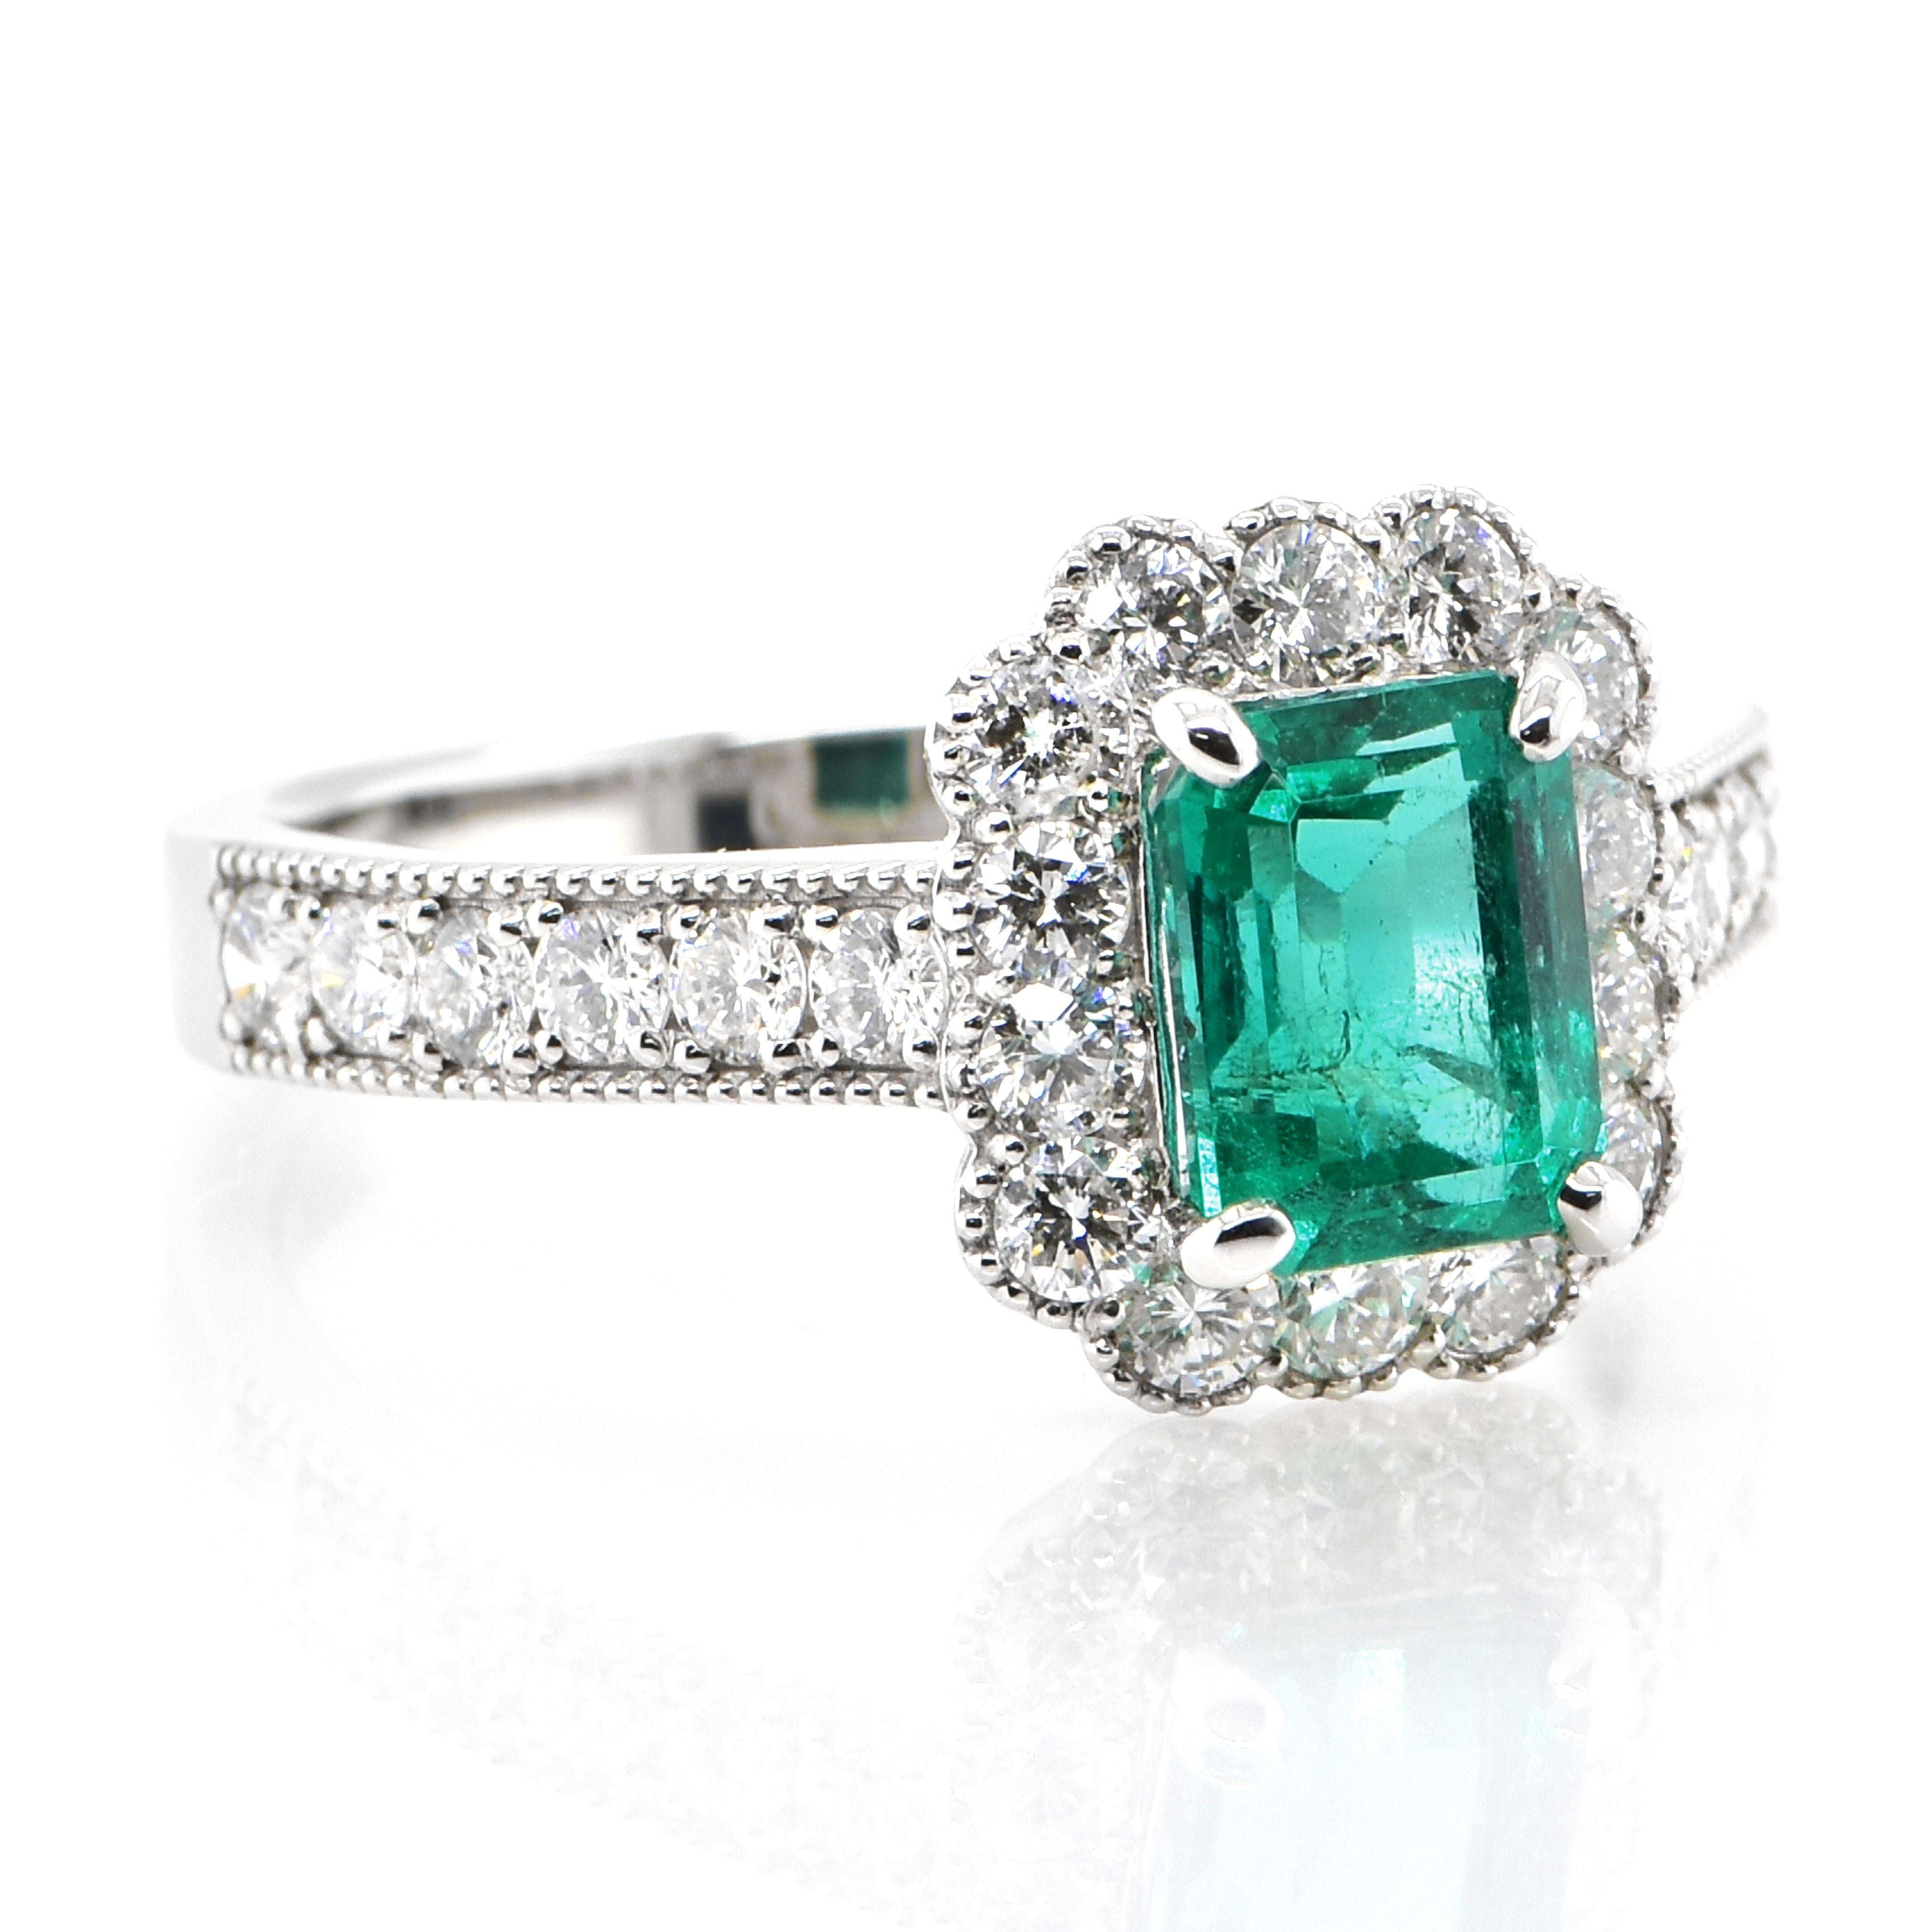 Modern 1.47 Carat Natural Colombian Emerald and Diamond Ring Set in Platinum For Sale